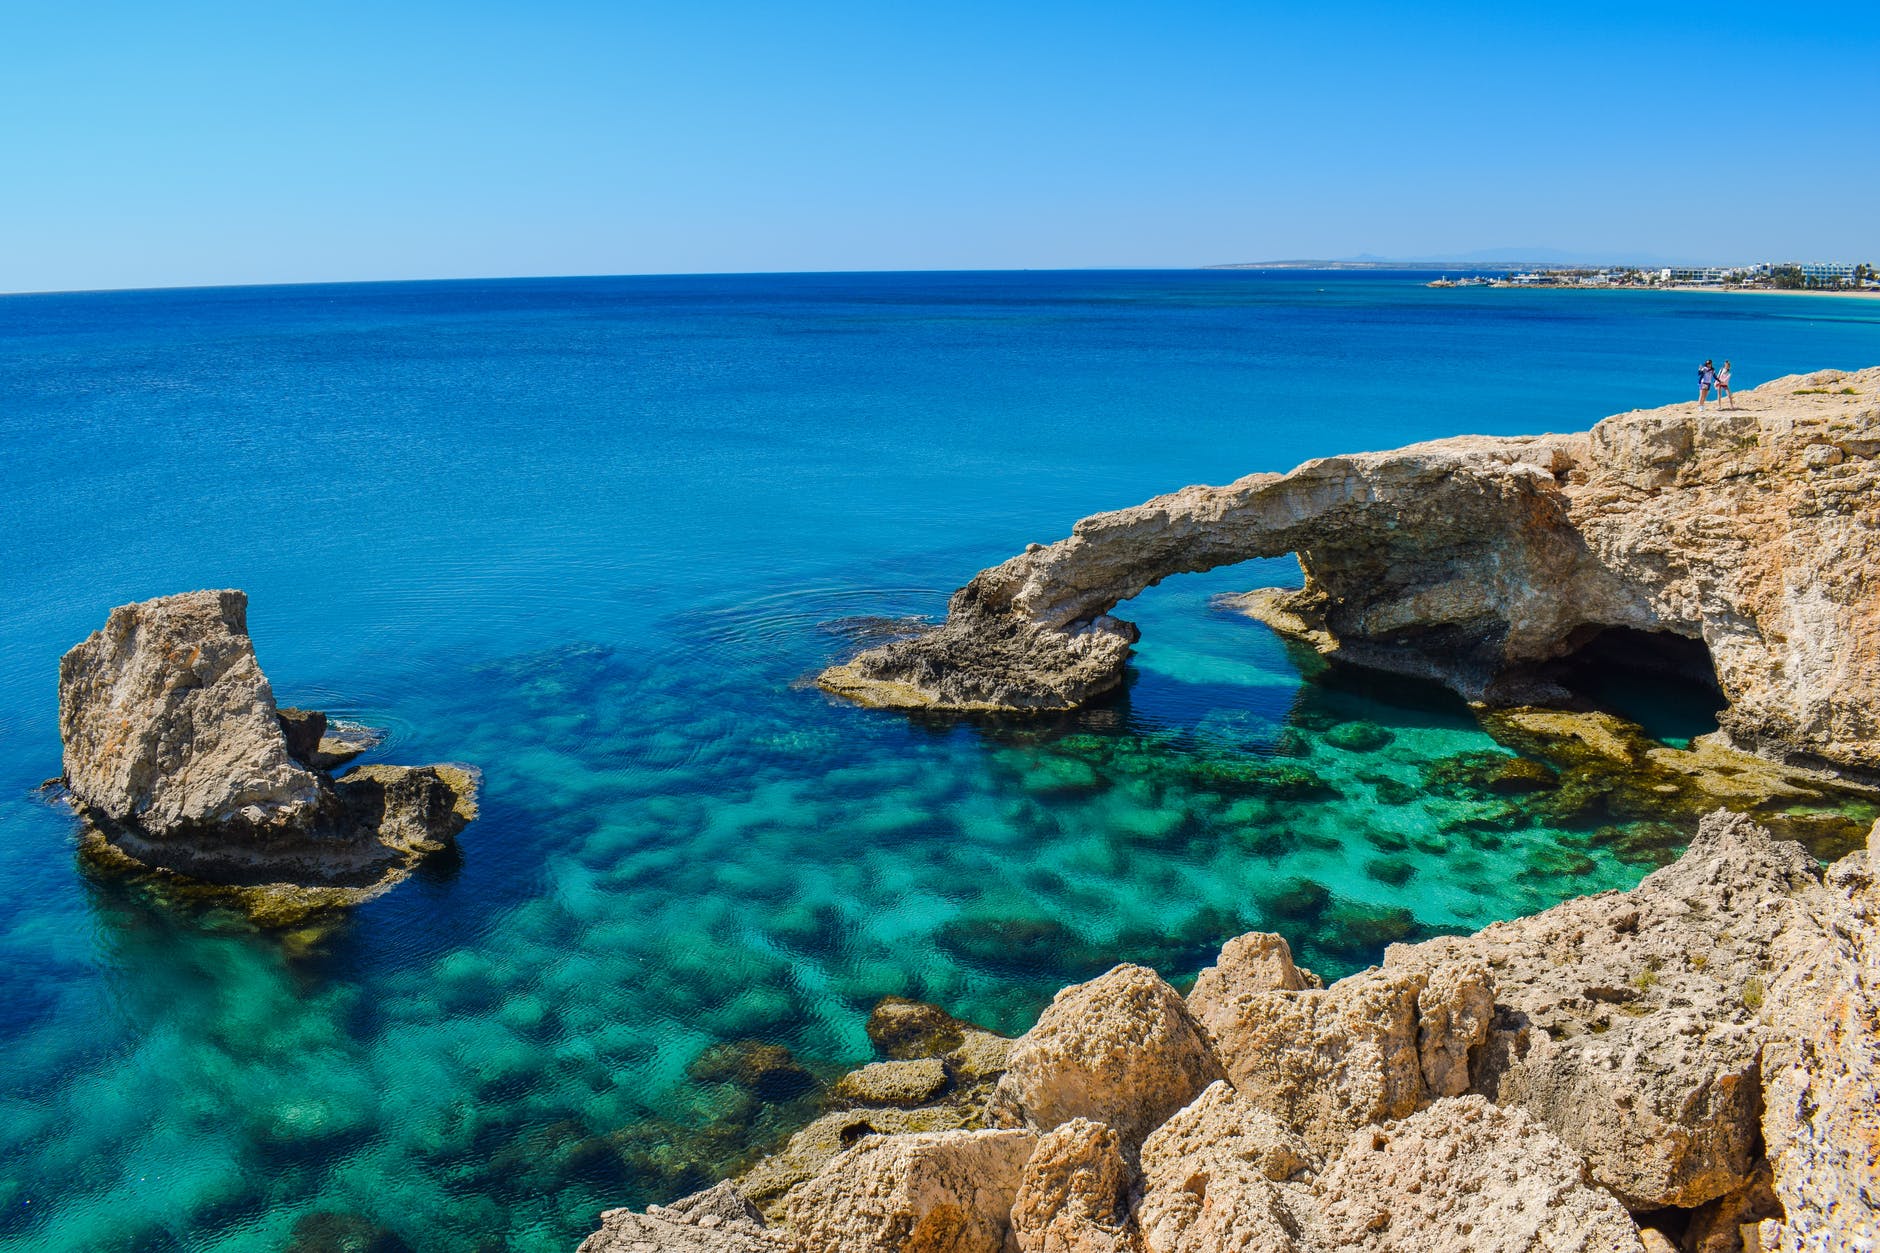 What to look out for while traveling to Cyprus